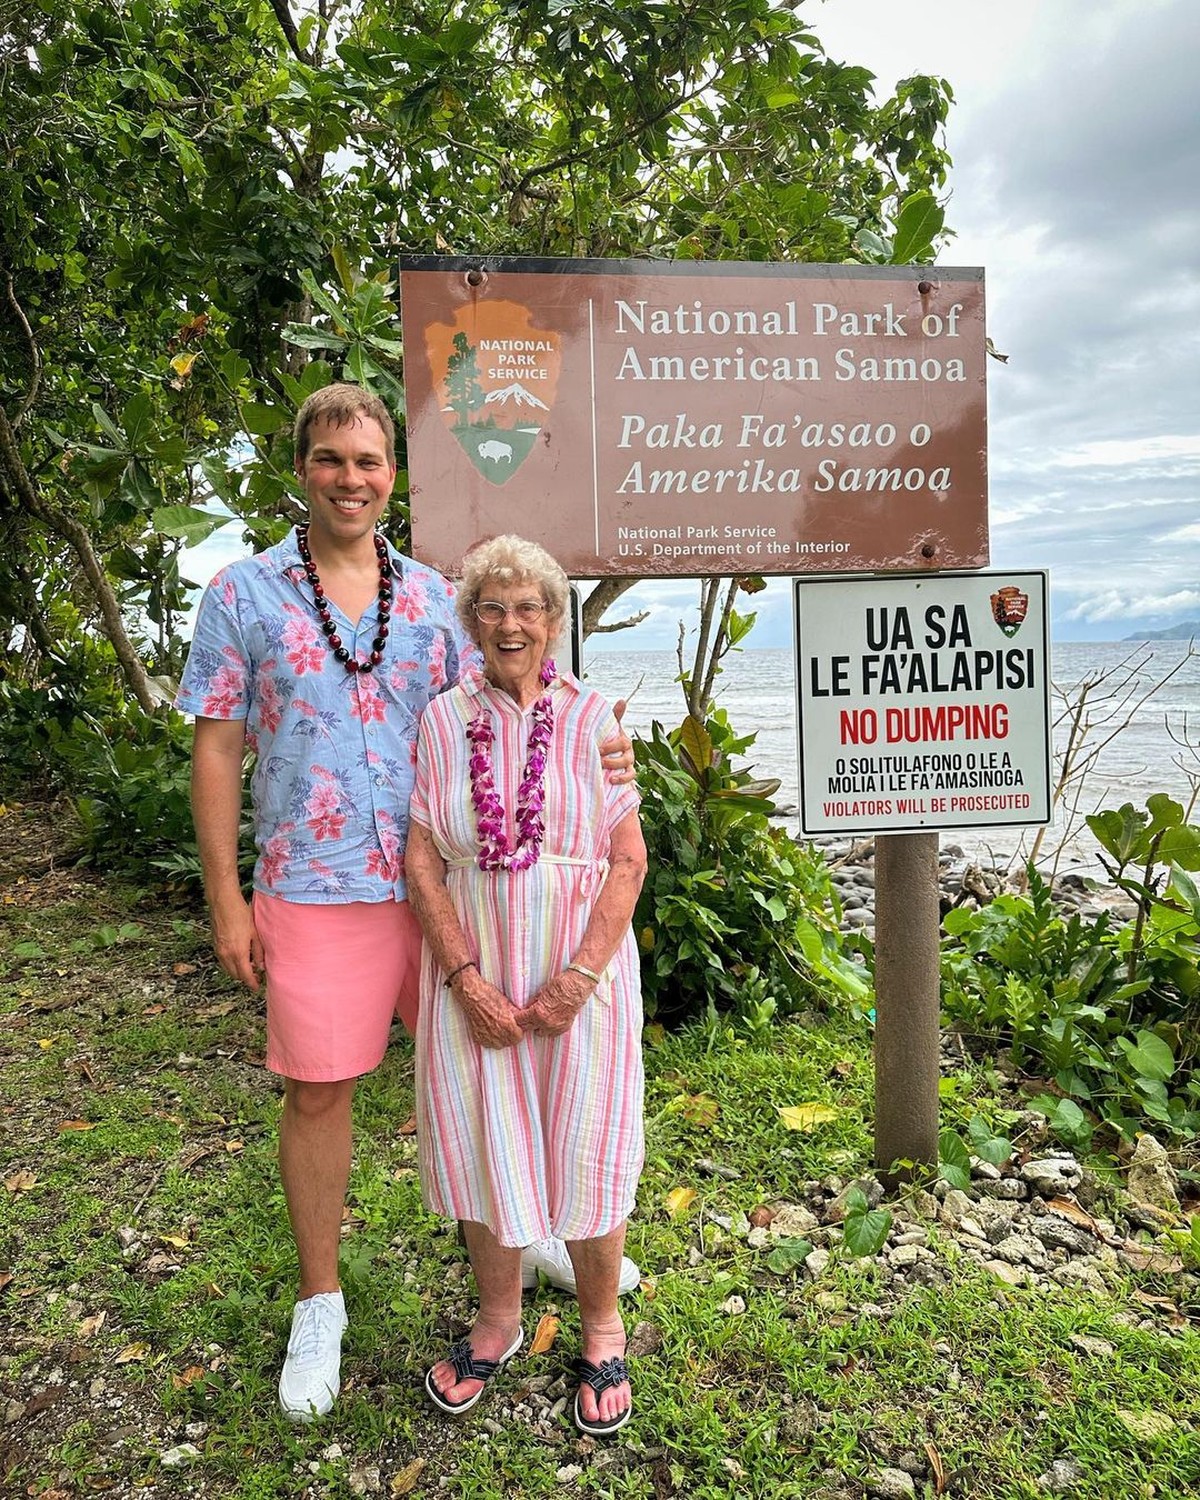 93-year-old grandma and grandson complete mission to visit all 63 US national parks